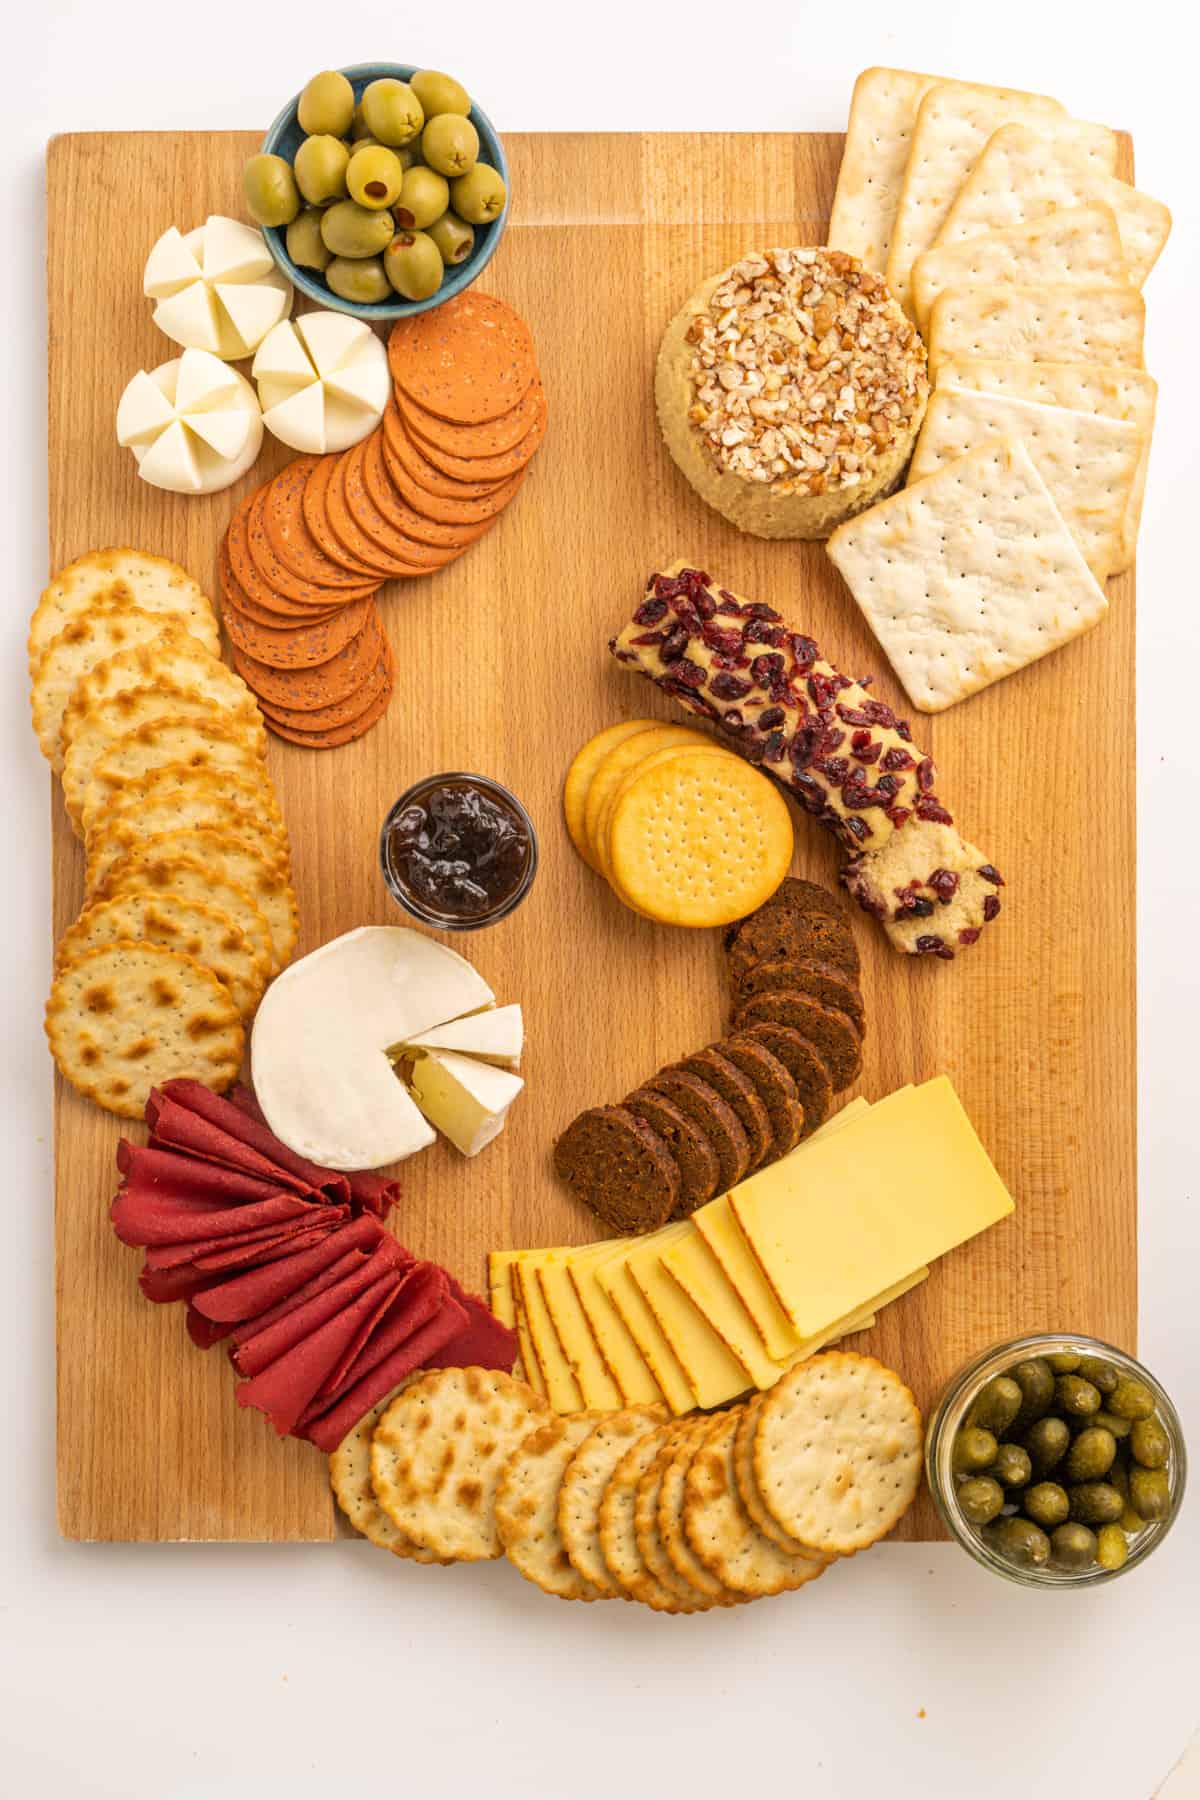 Arranged on a wooden board, three types of crackers, various vegan cheeses, ready-to-eat vegan deli slices and small bowls of olives, pickles and chutney.